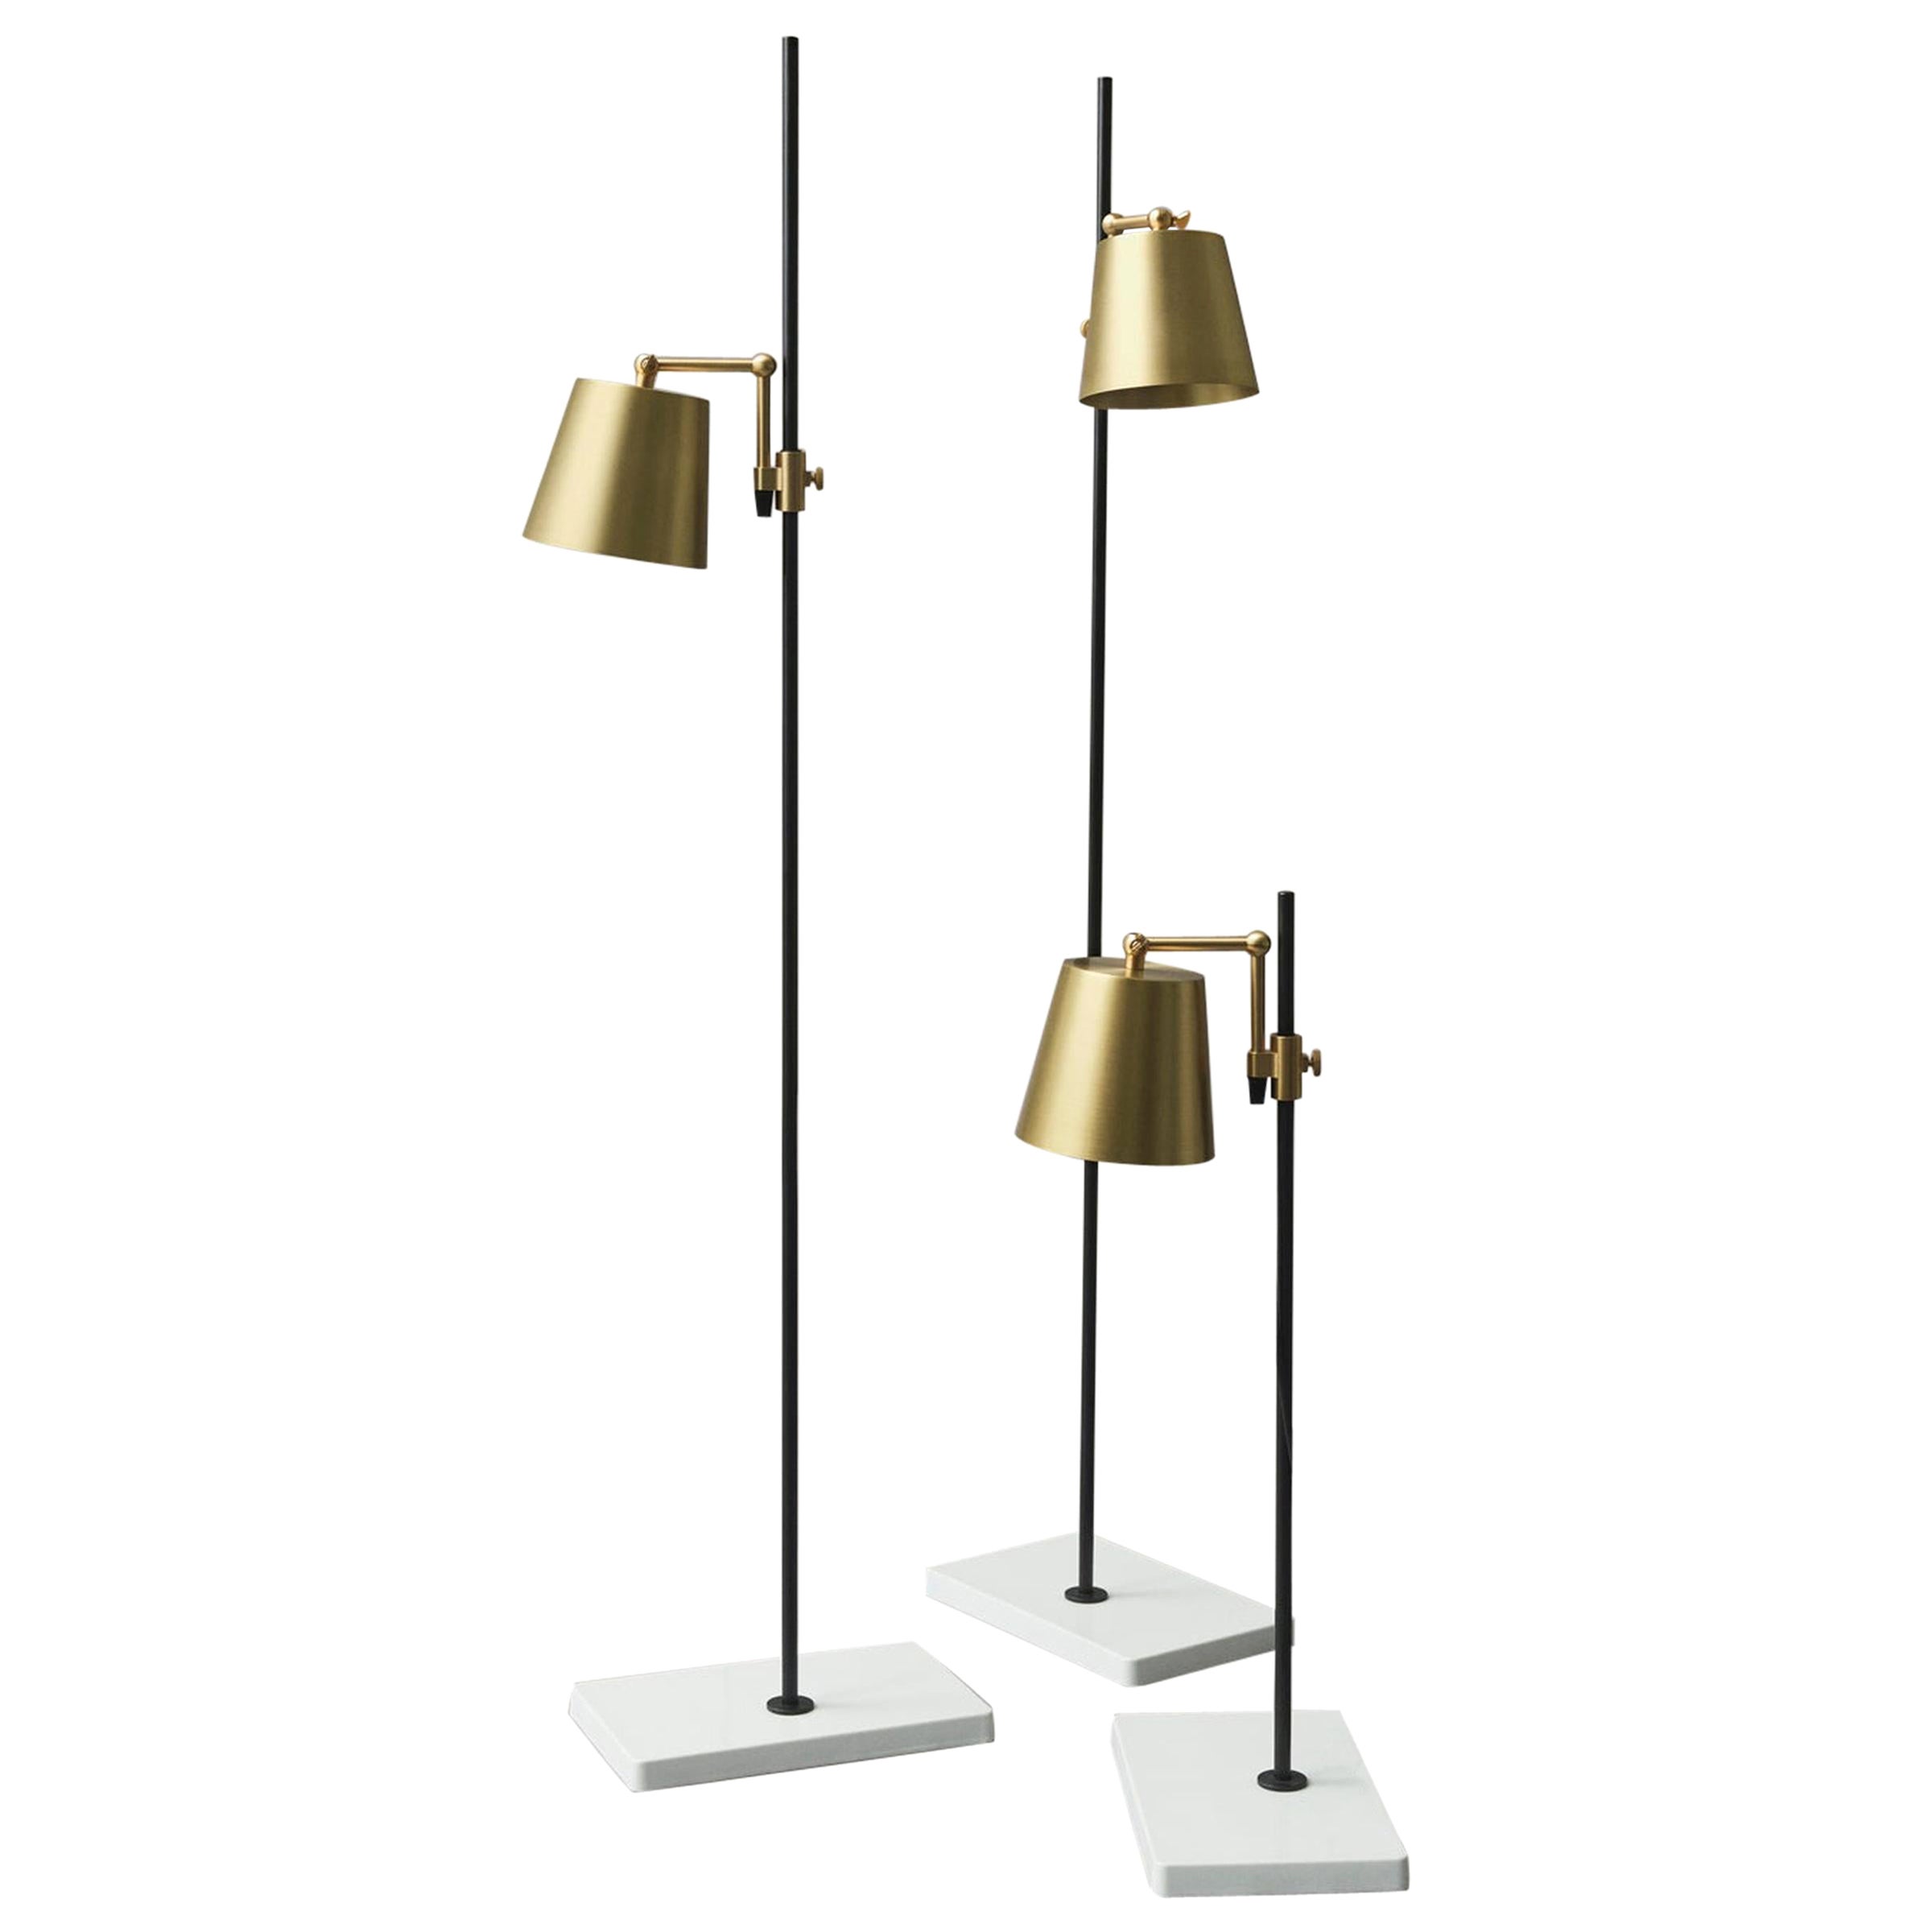 Set of Three 'Lab Light' Table and Floor Lamps by Anatomy Design